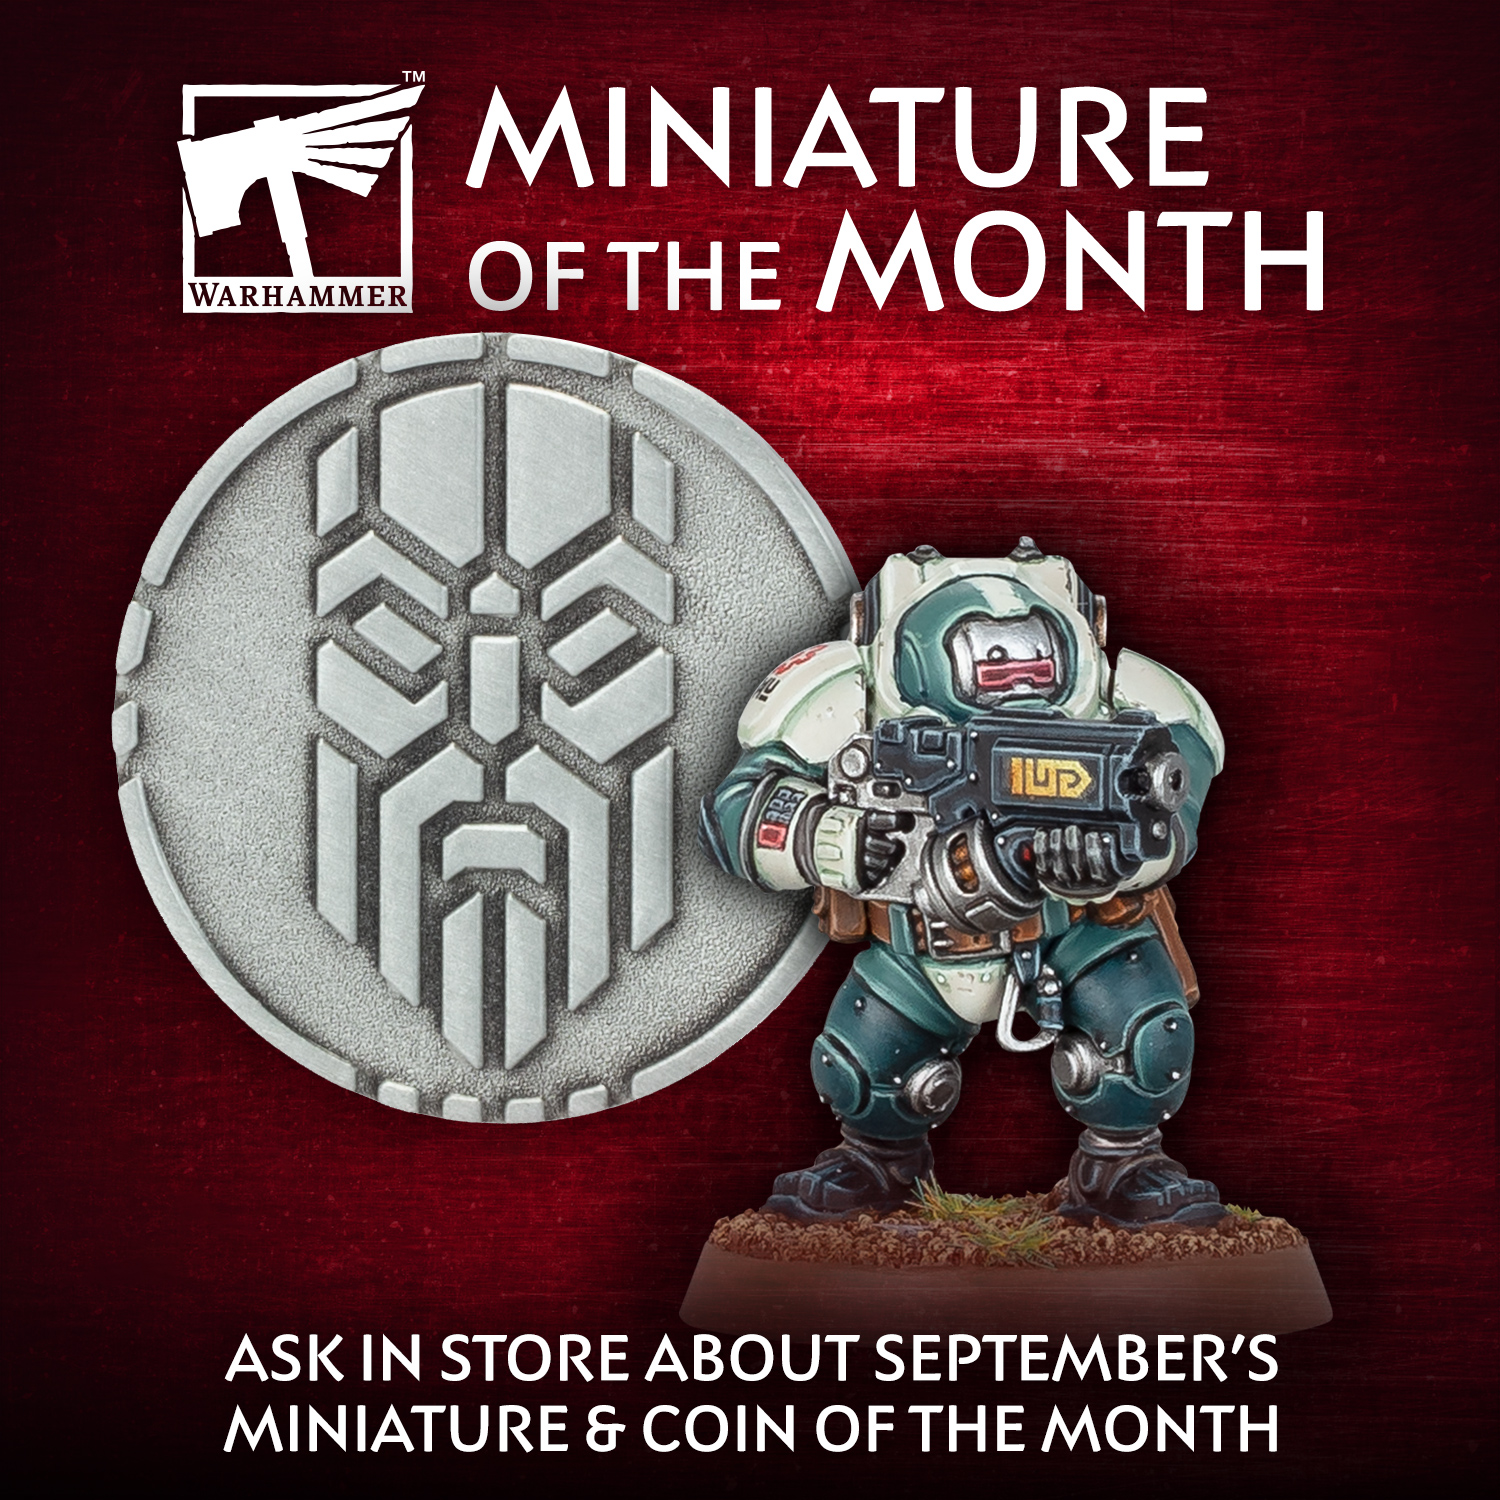 New In Stores: The Latest Miniature of the Month! - Warhammer